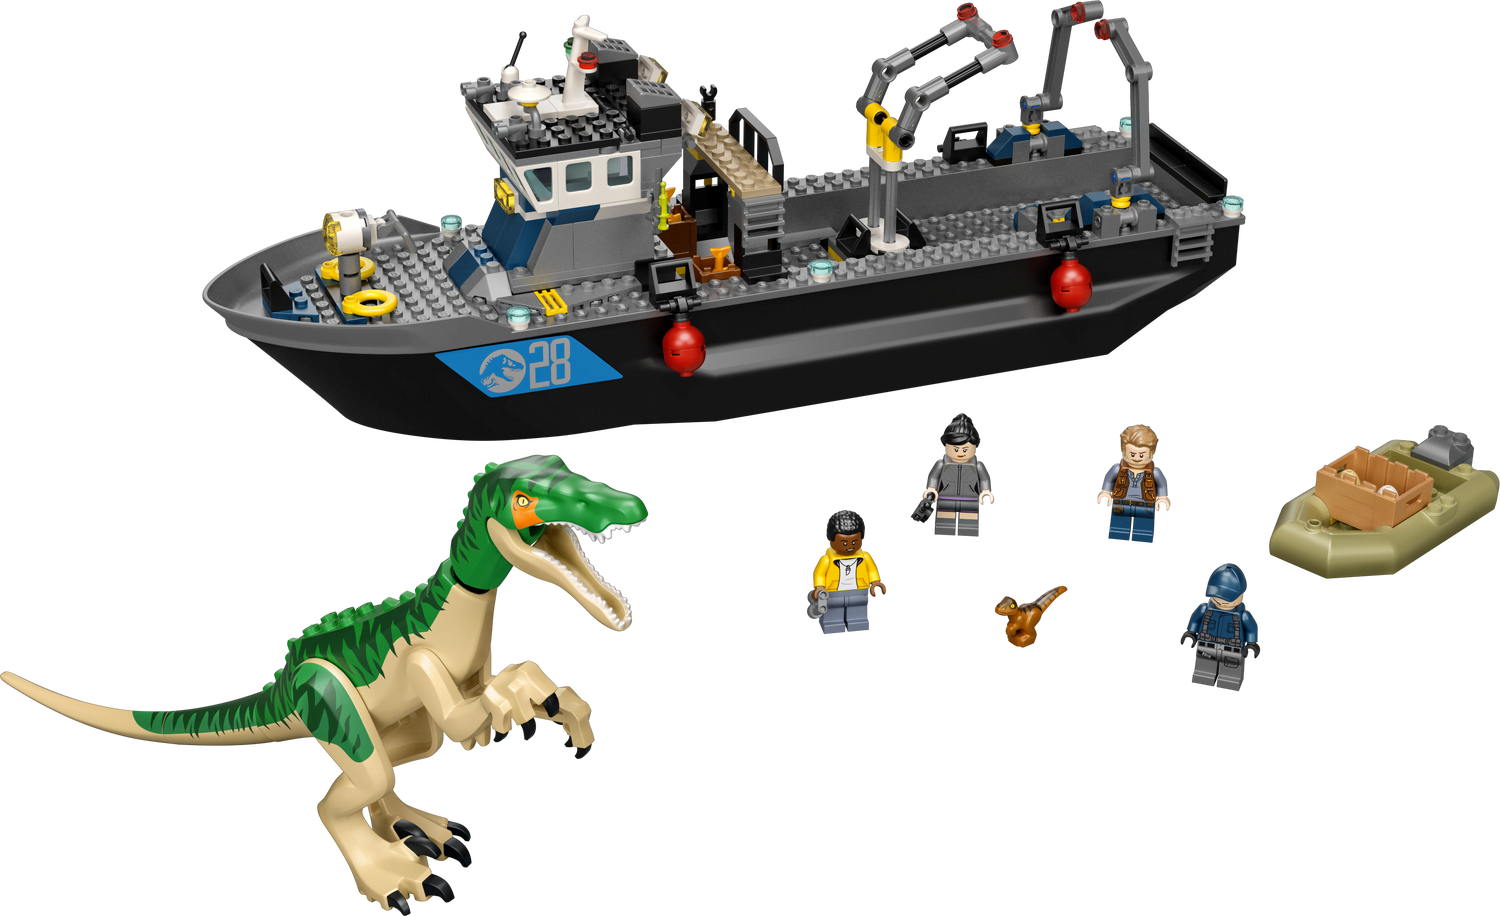 online contests, sweepstakes and giveaways - LEGO Jurassic World Dominion giveaway